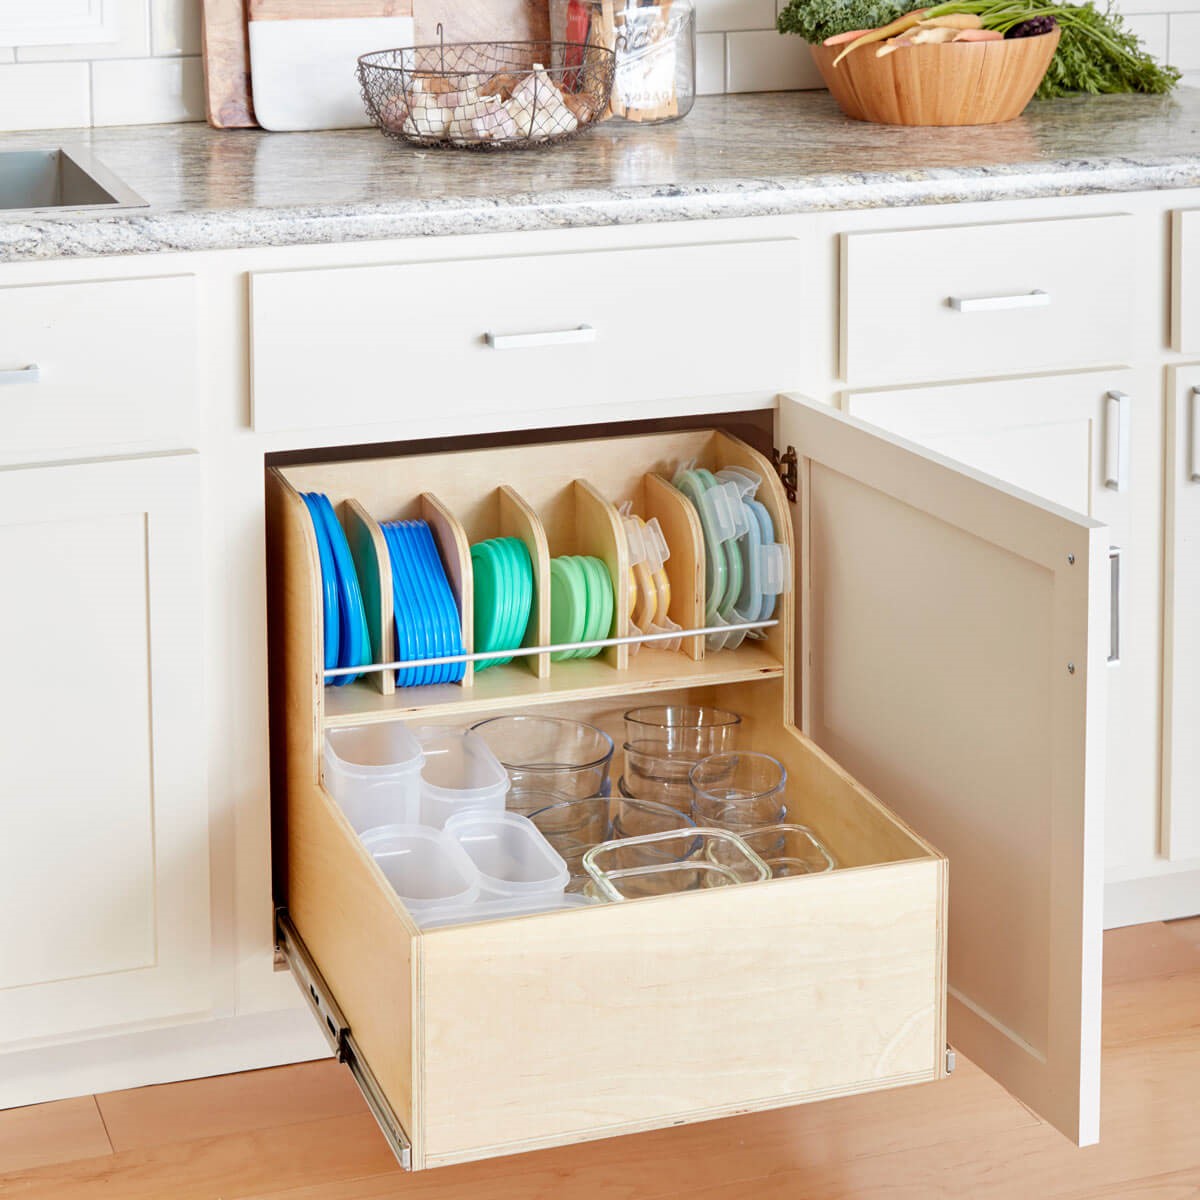 6. Pull Out Container Rack via Simphome